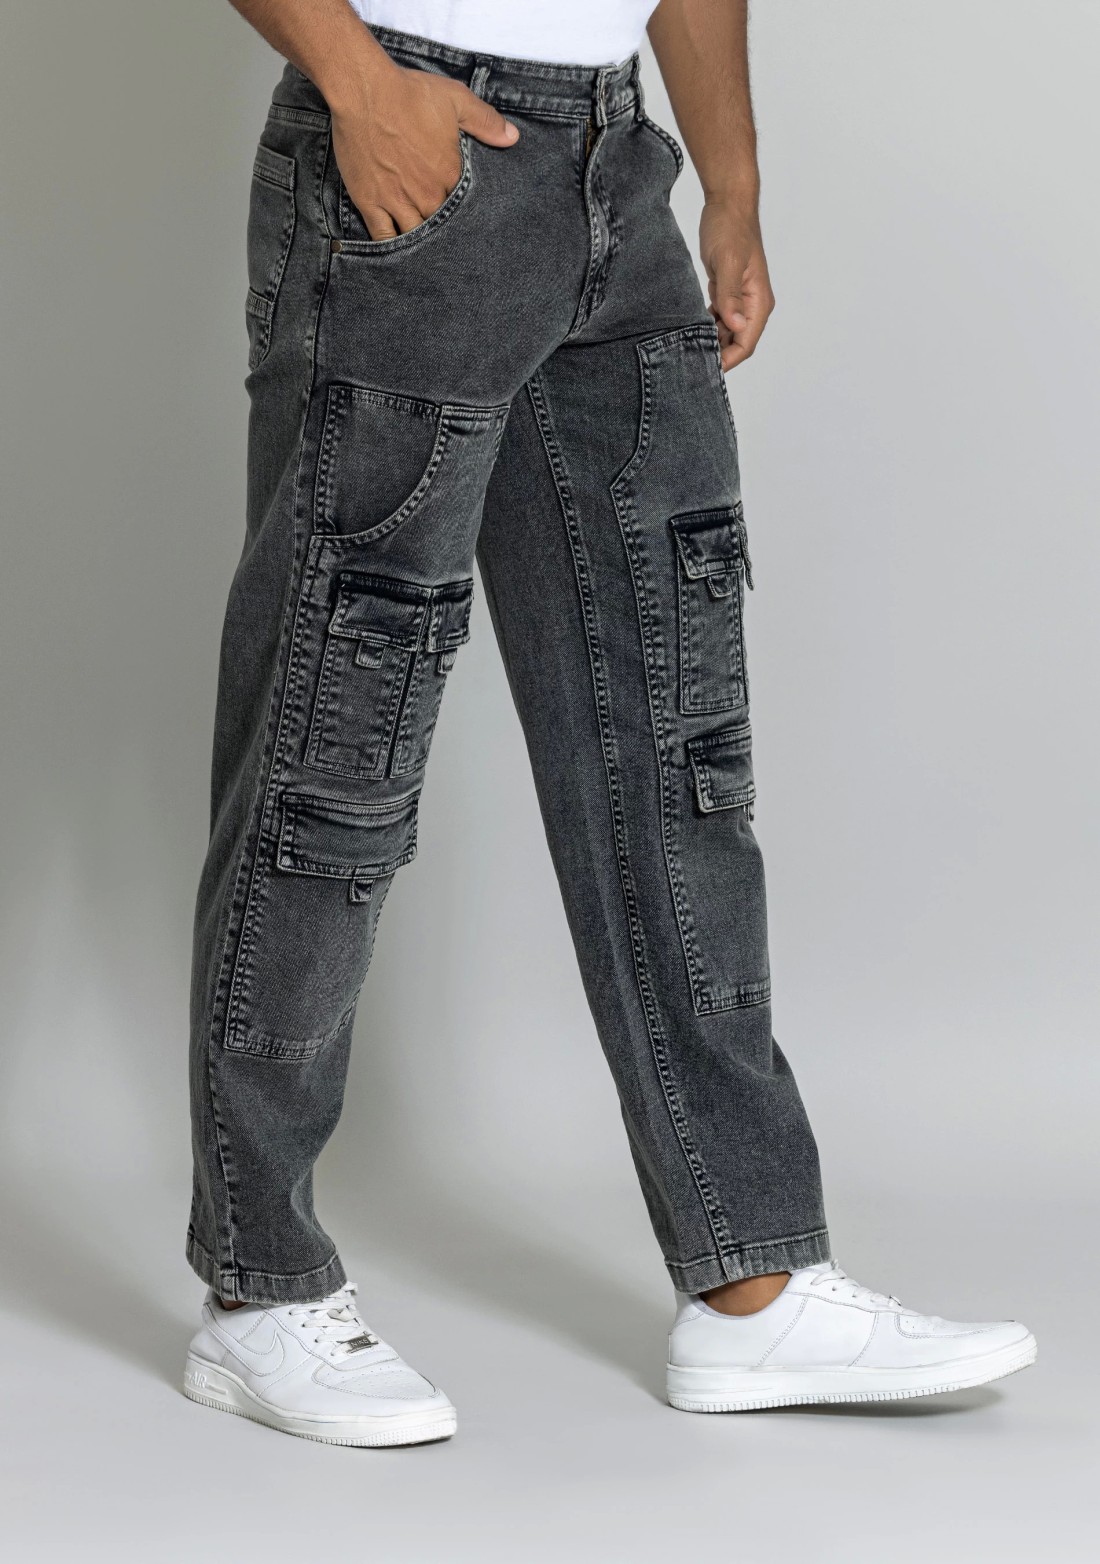 Black Straight Fit Cut and Sew Men's Fashion Jeans